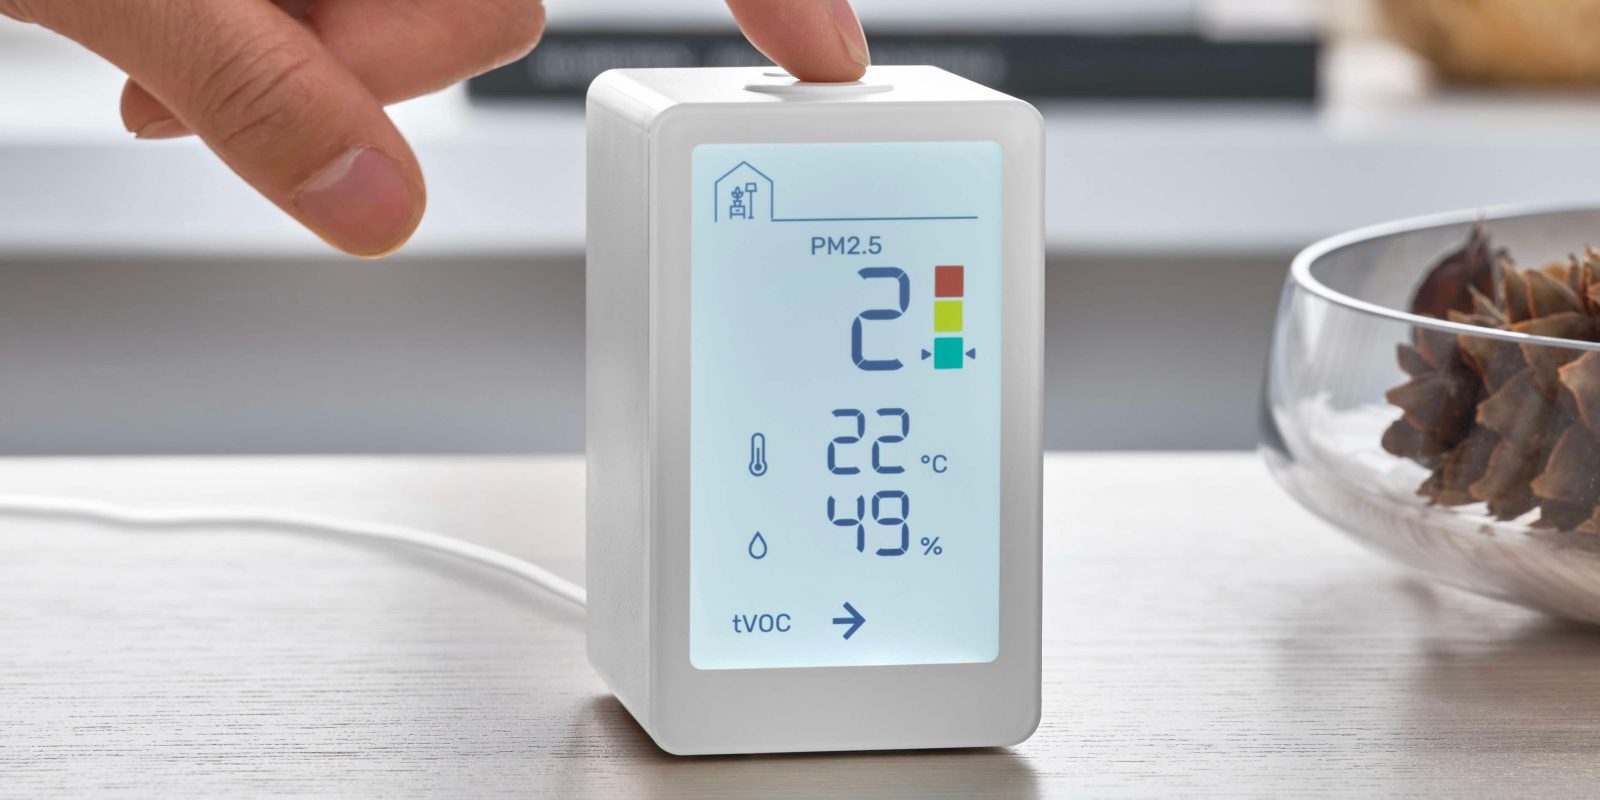 IKEA smart indoor air quality monitor